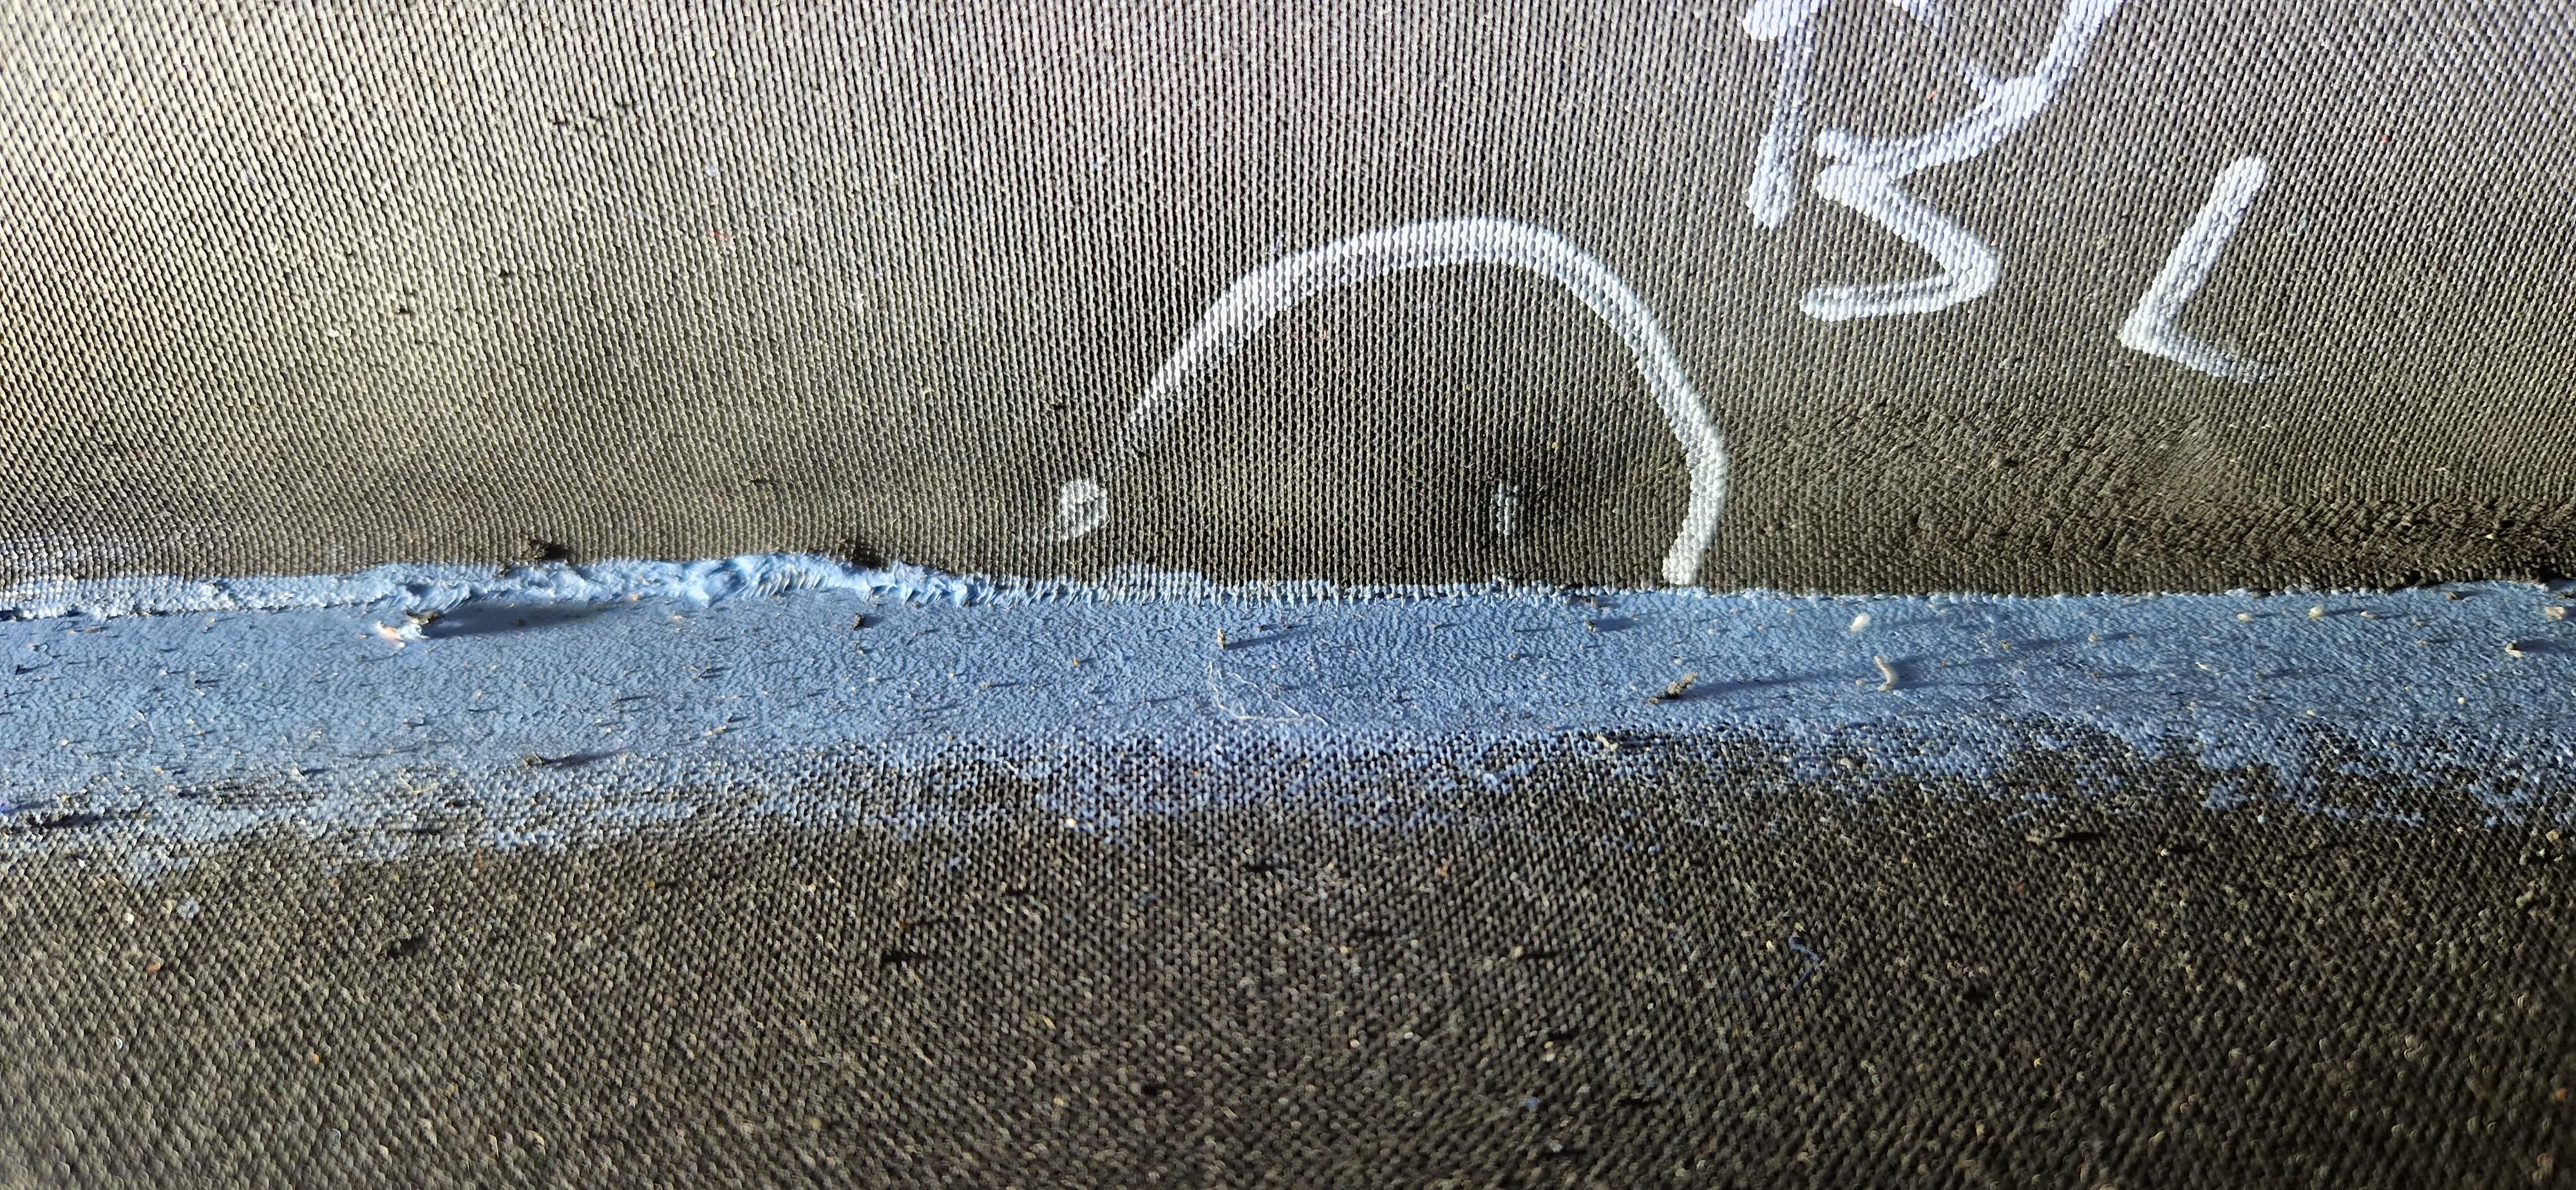 The defect of the rubberlined surface is shown.